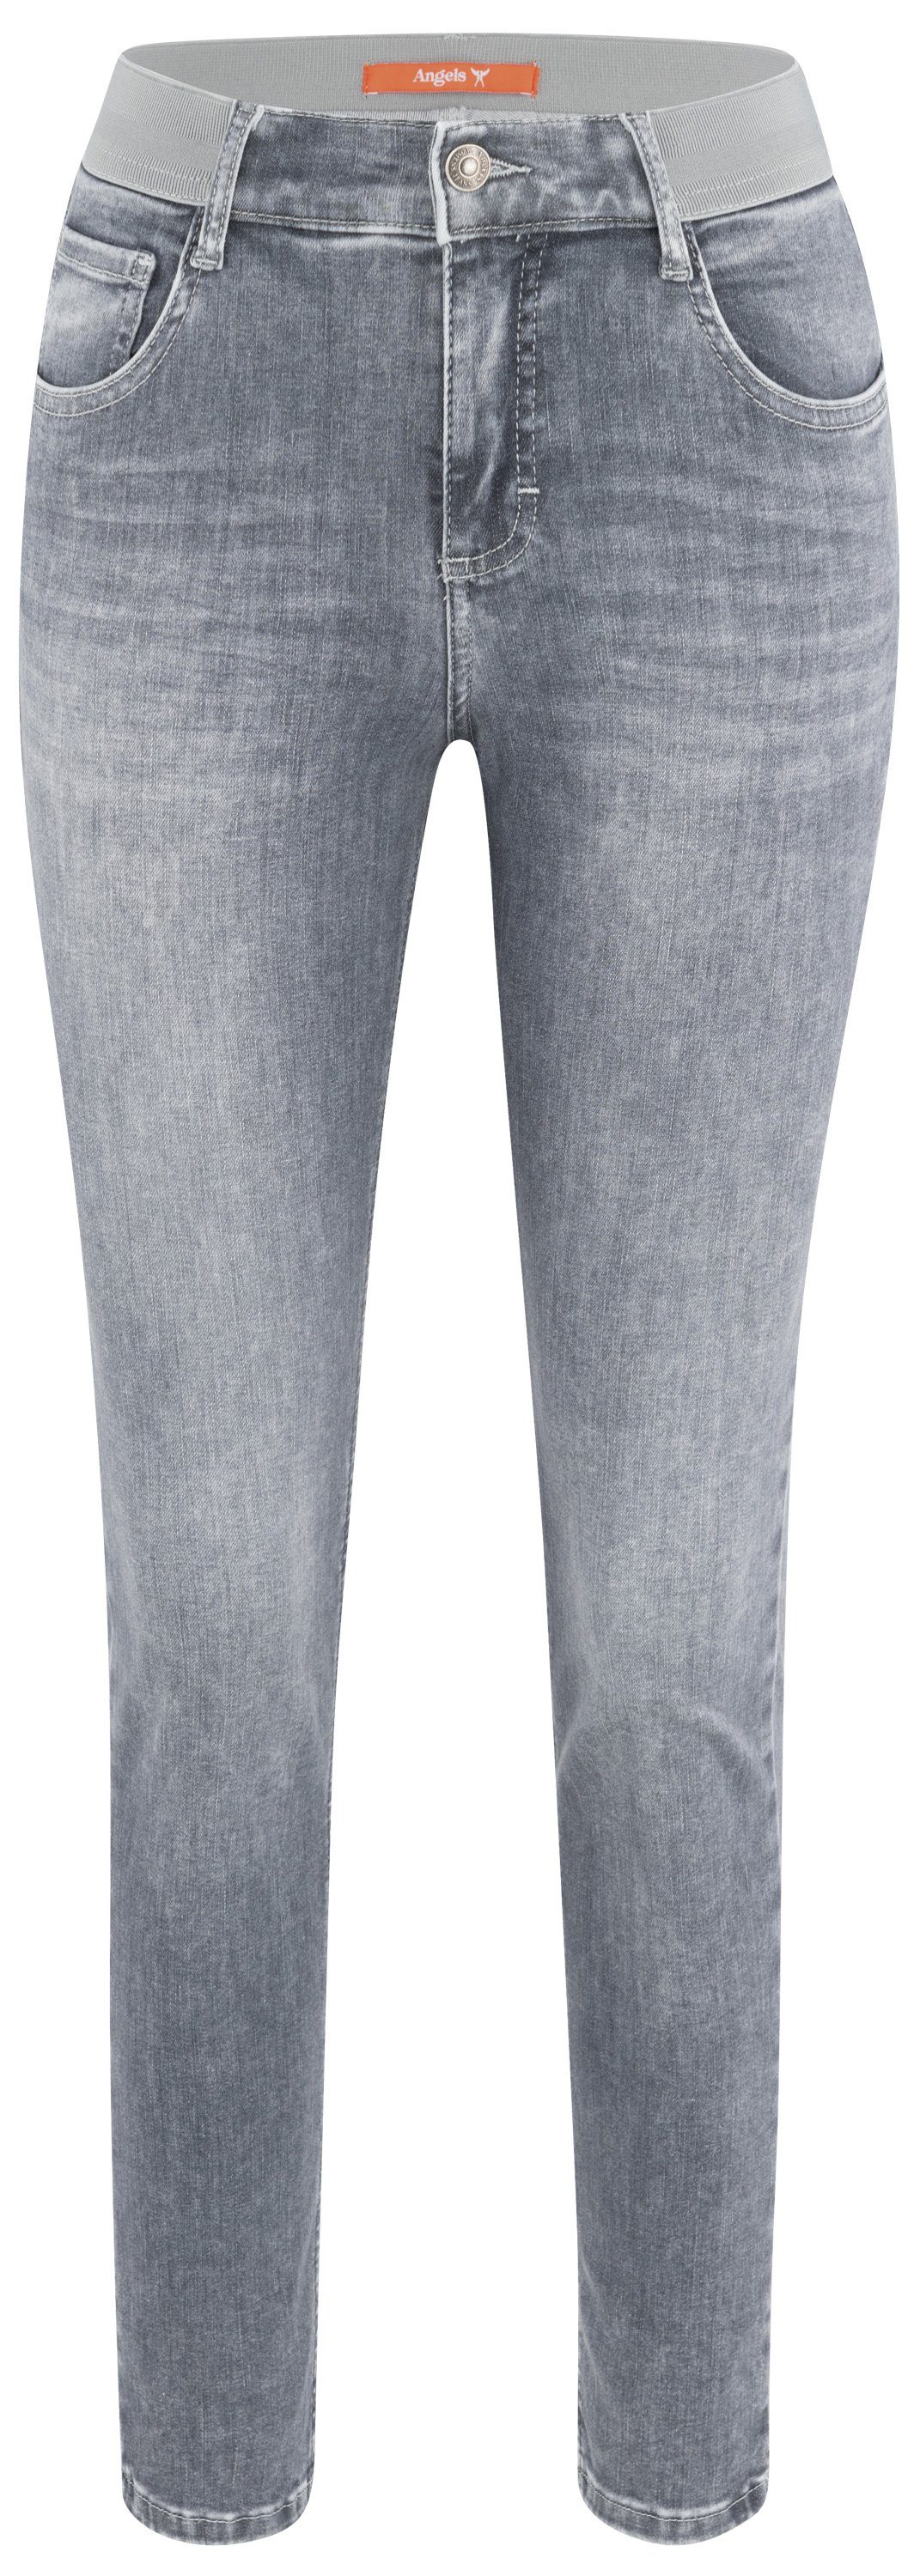 ANGELS Stretch-Jeans ANGELS JEANS ONE SIZE mid grey used 399 123730.1358 1358 mid grey used